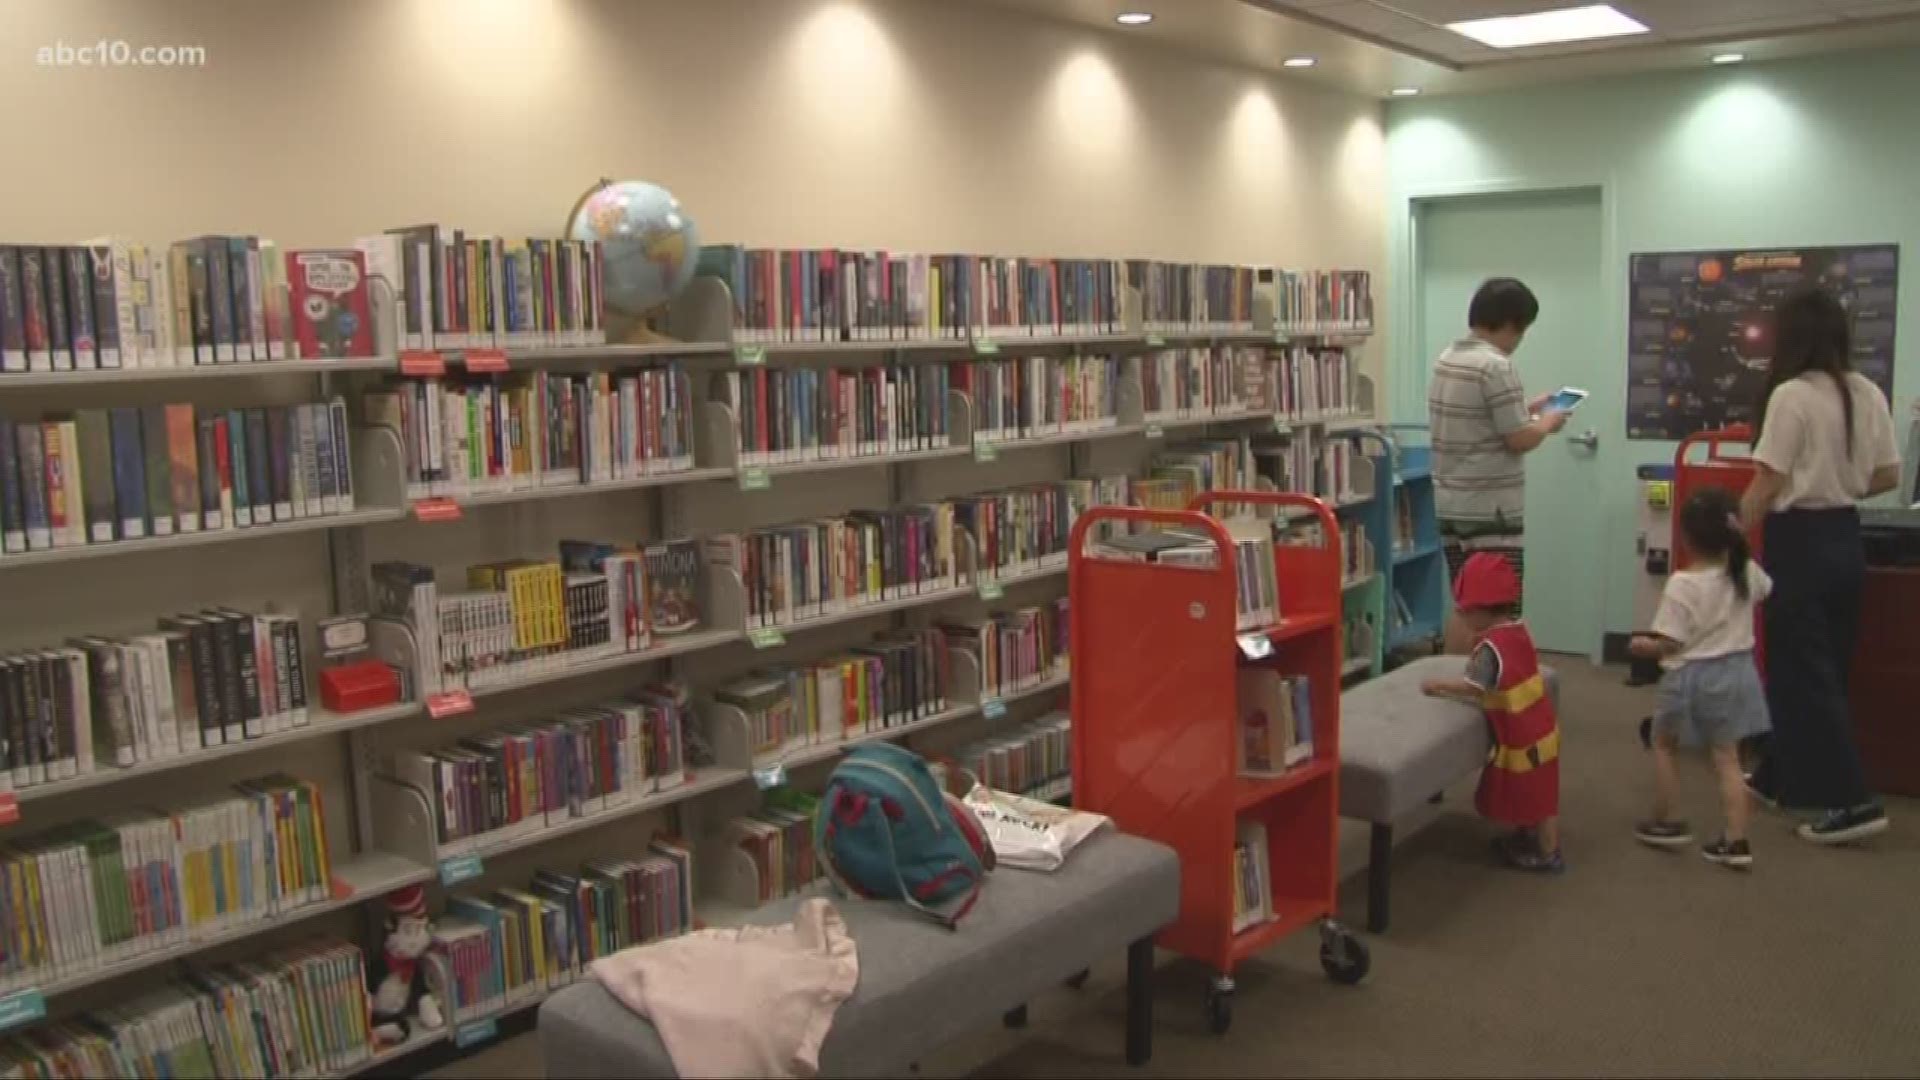 Stockton micro-libraries are turning the page at one center but moving ahead at others.